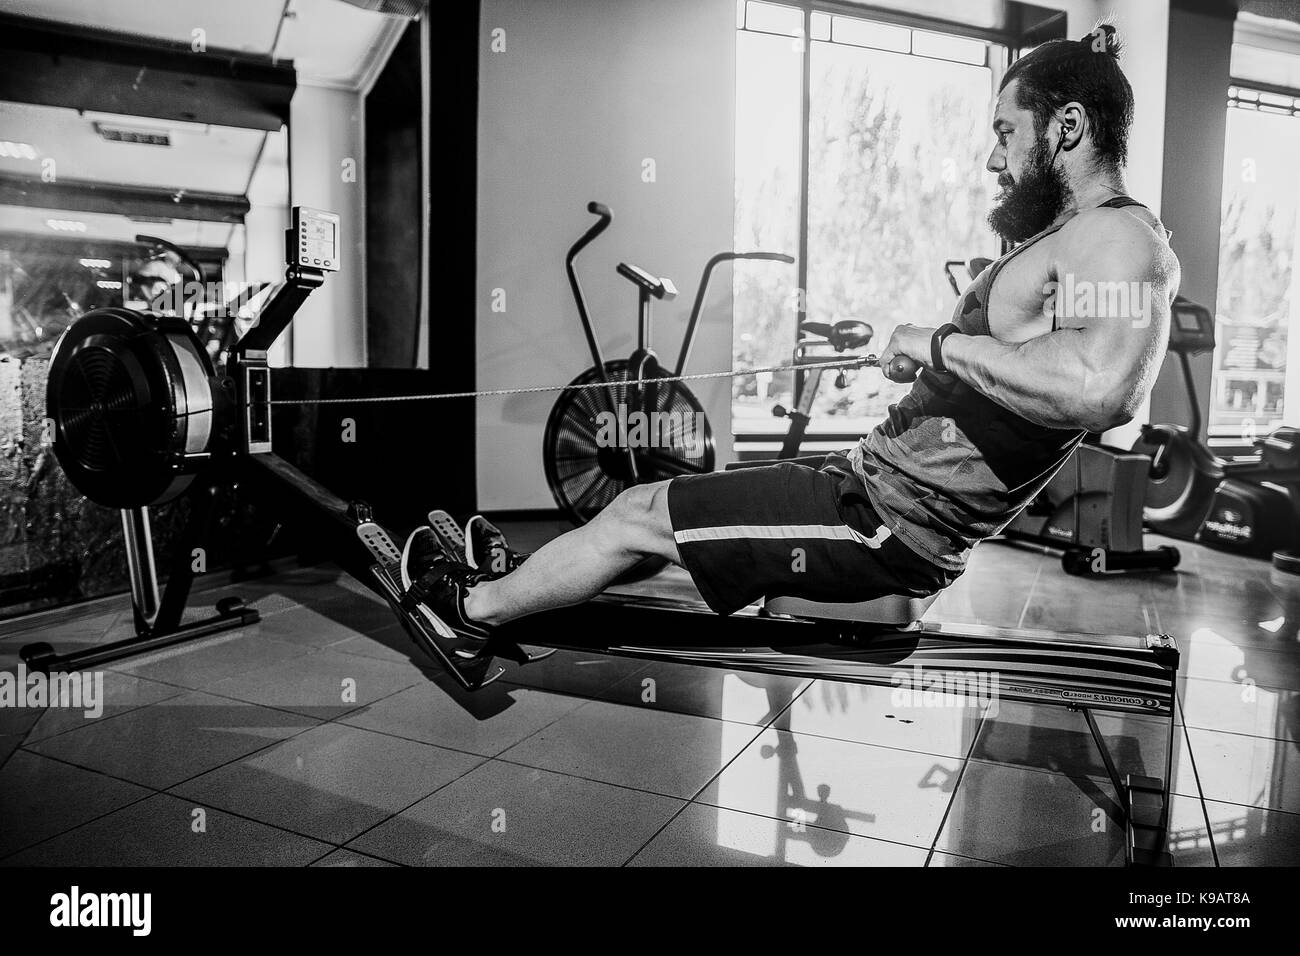 Muscular fit man using rowing machine at gym Stock Photo